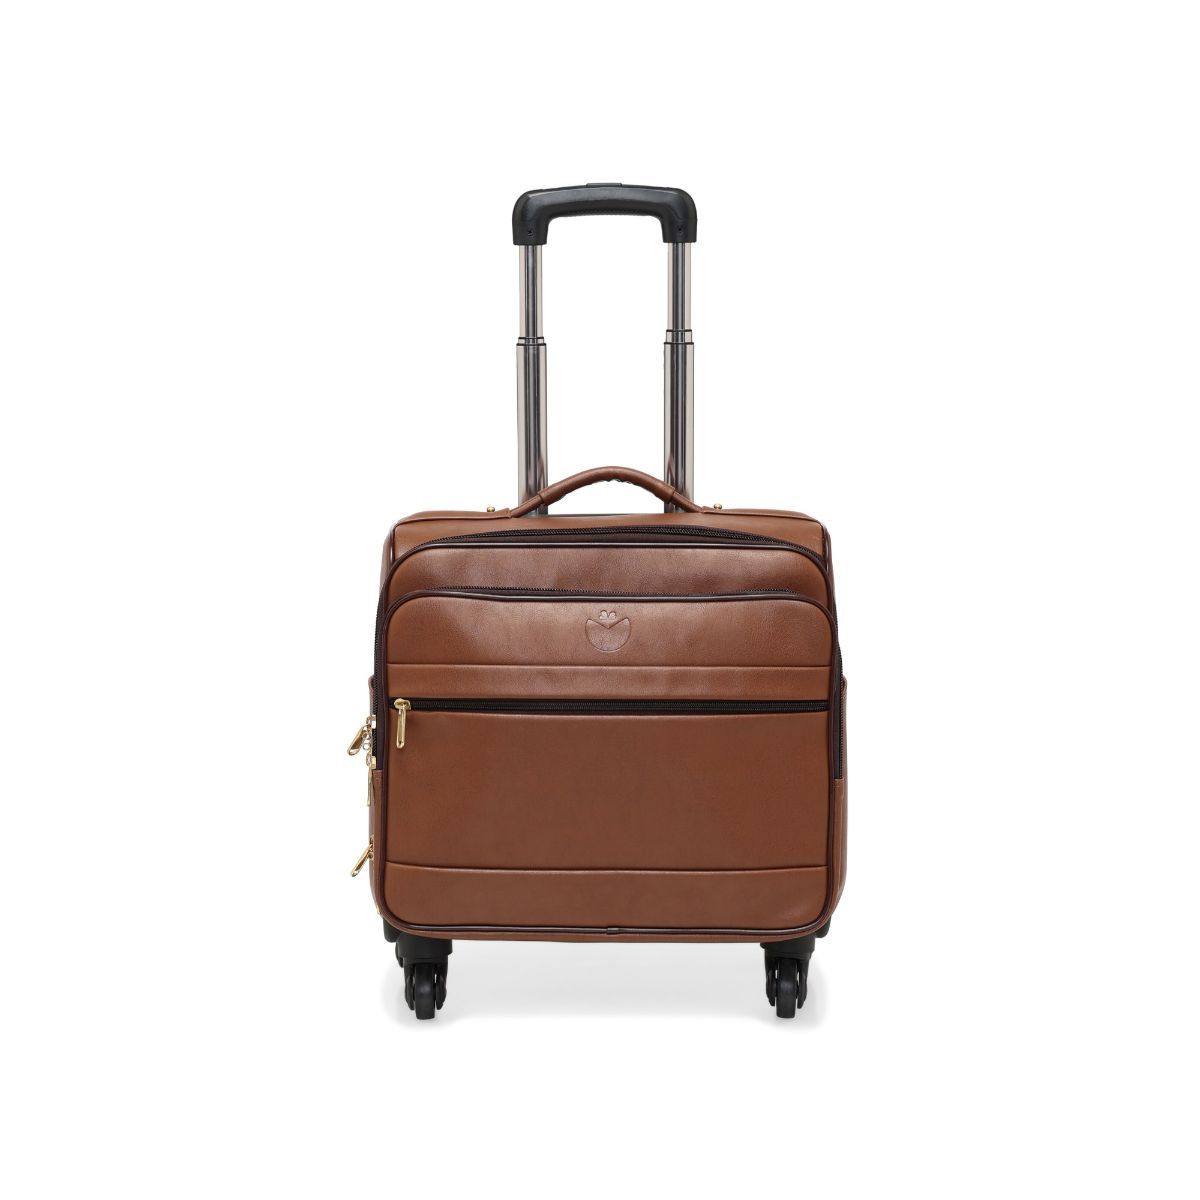 Shop Luggage Trolley Bags At Best Prices Online In India  Tata CLiQ